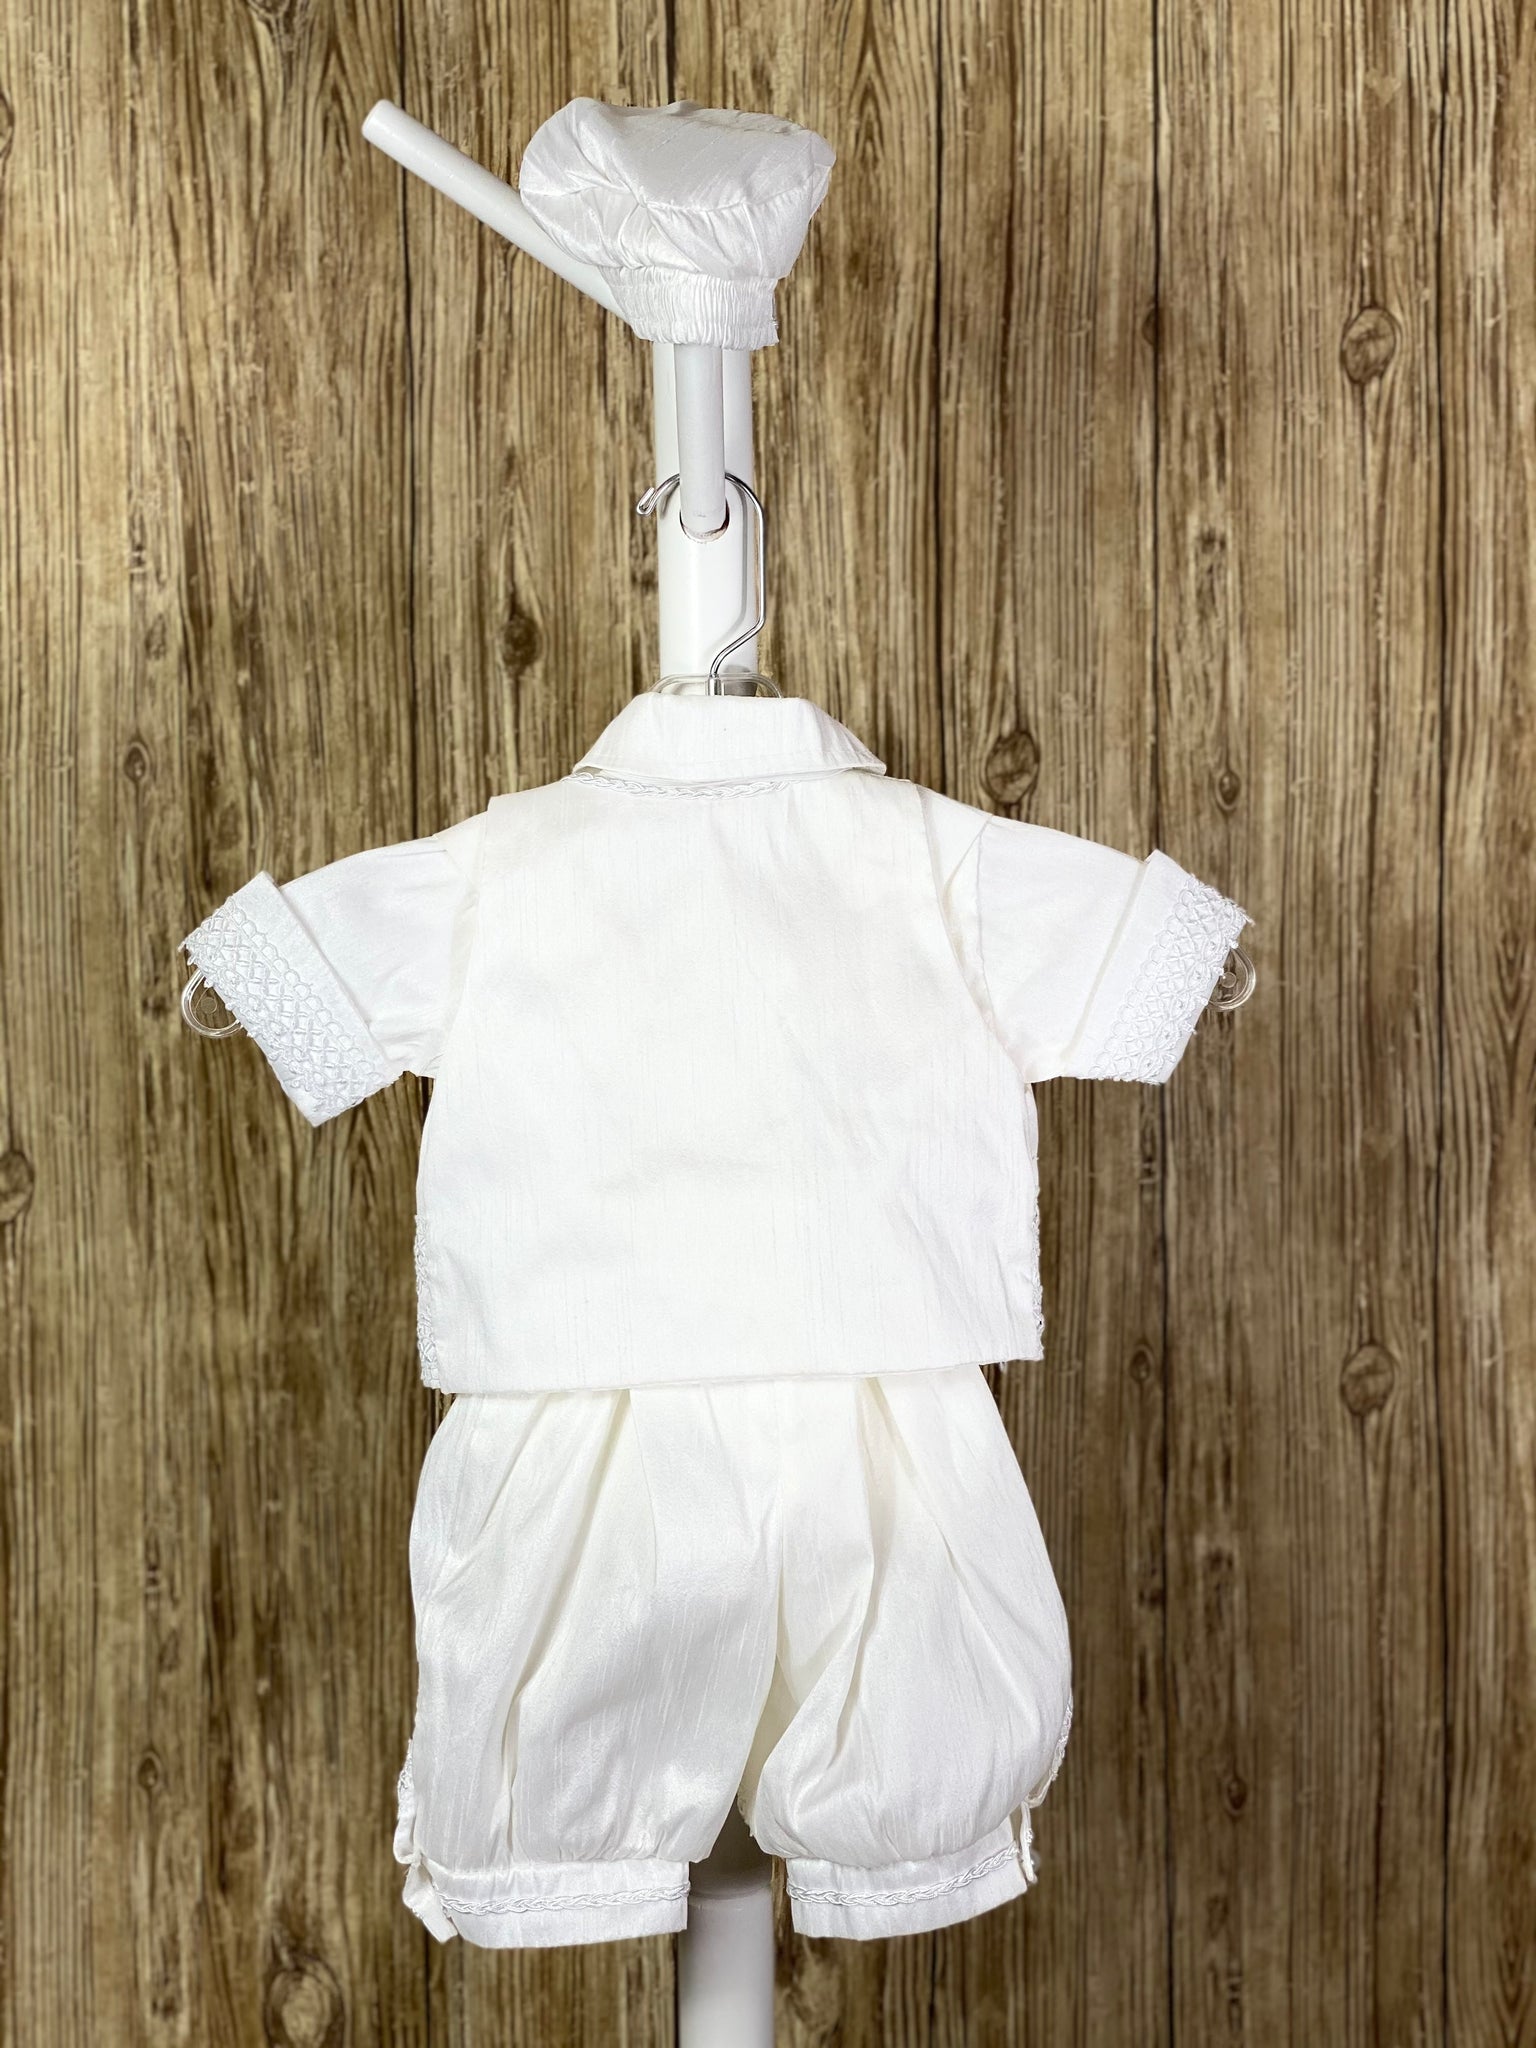 This a beautiful, one-of-a-kind boy’s baptism gown/set.  Lovely clothes for a precious child.  White, size 6M  5-piece set including shirt, pants, vest, bow tie and beret Pearl closure on vest Braided trim on vest collar edging, pant cuffs and cummerbund, and beret band Pearl button down shirt with crochet ribbon down sides Ribbon around arm cuffs and pant legs Buttoning on pant cuffs Elastic banding behind pants